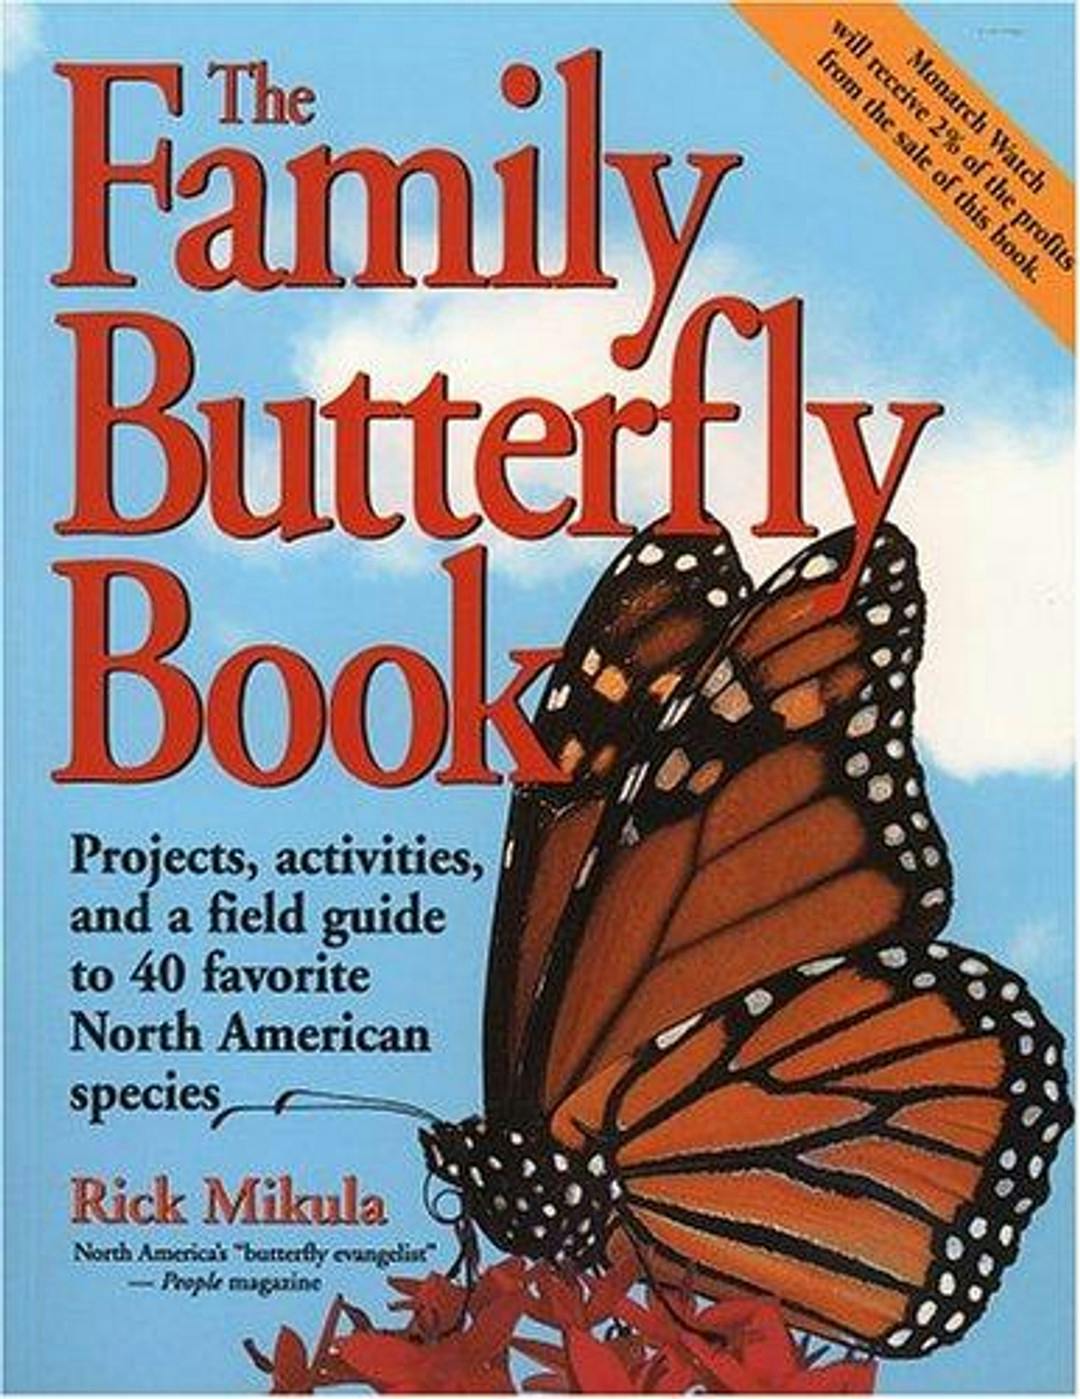 The Family Butterfly Book: Projects, activities, and a field guide to 40 favorite North American species